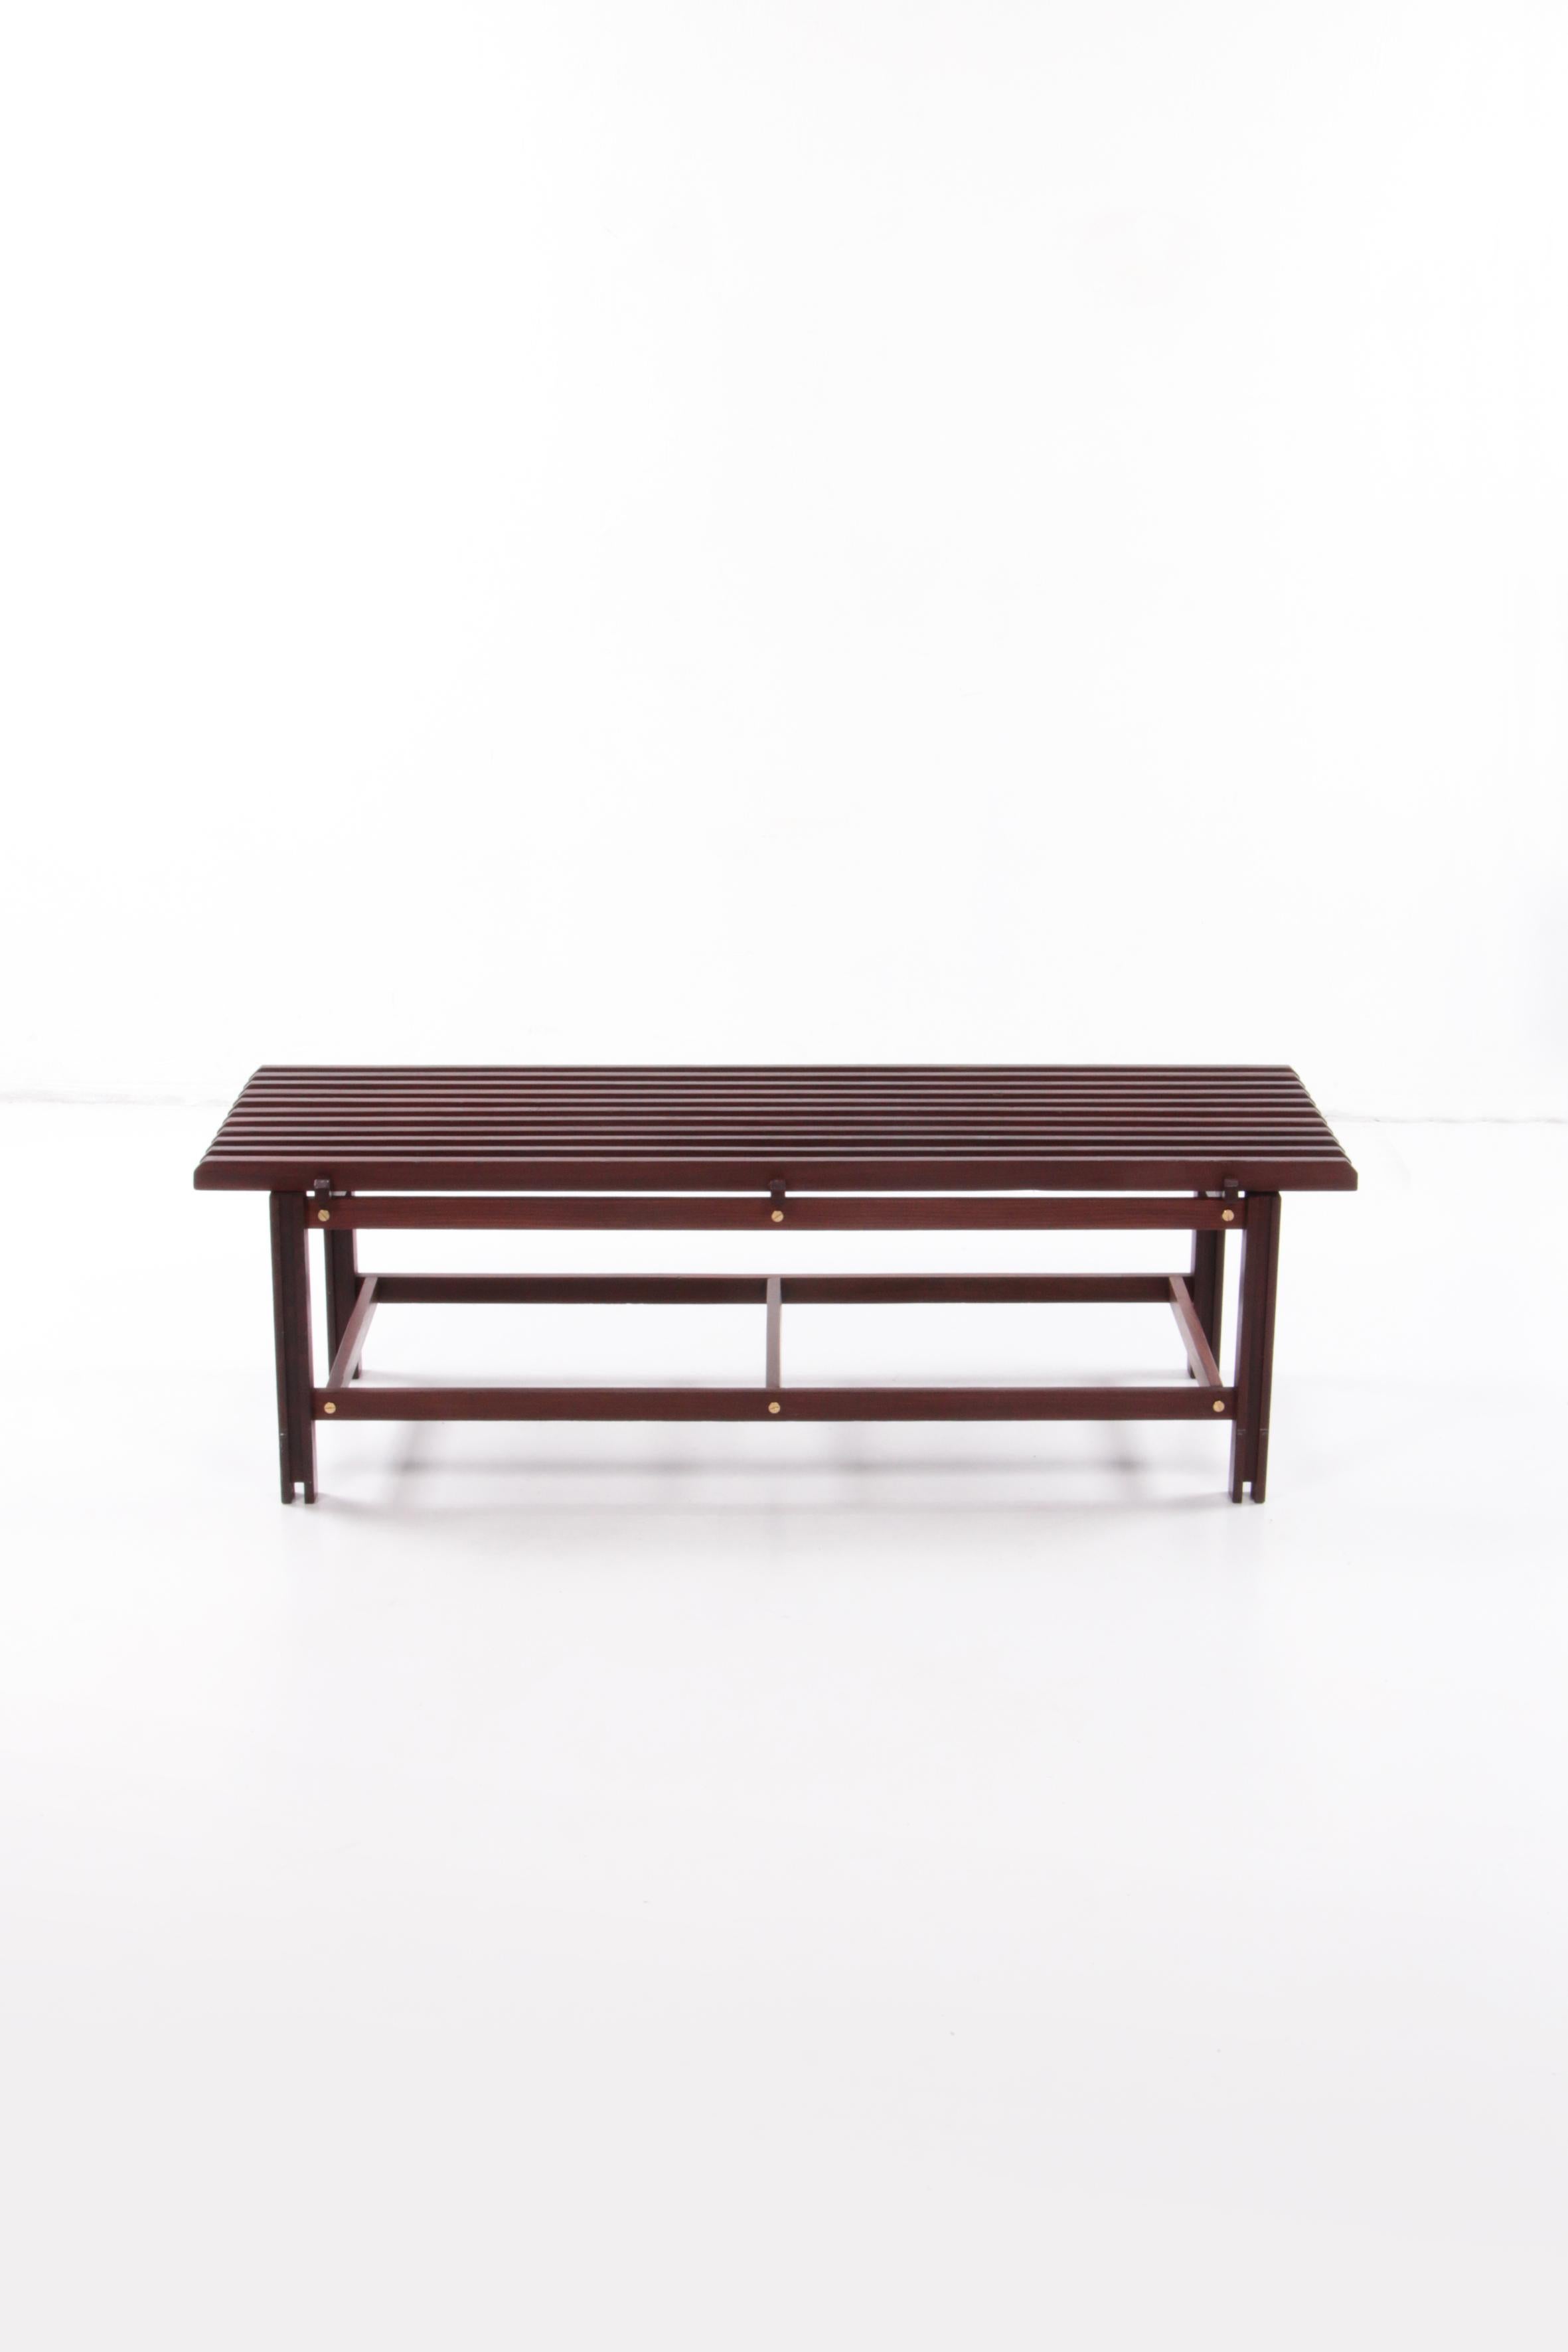 Mid-Century Modern Ico & Luisa Parisi Designed Wooden Bench Made in Italy in 1960